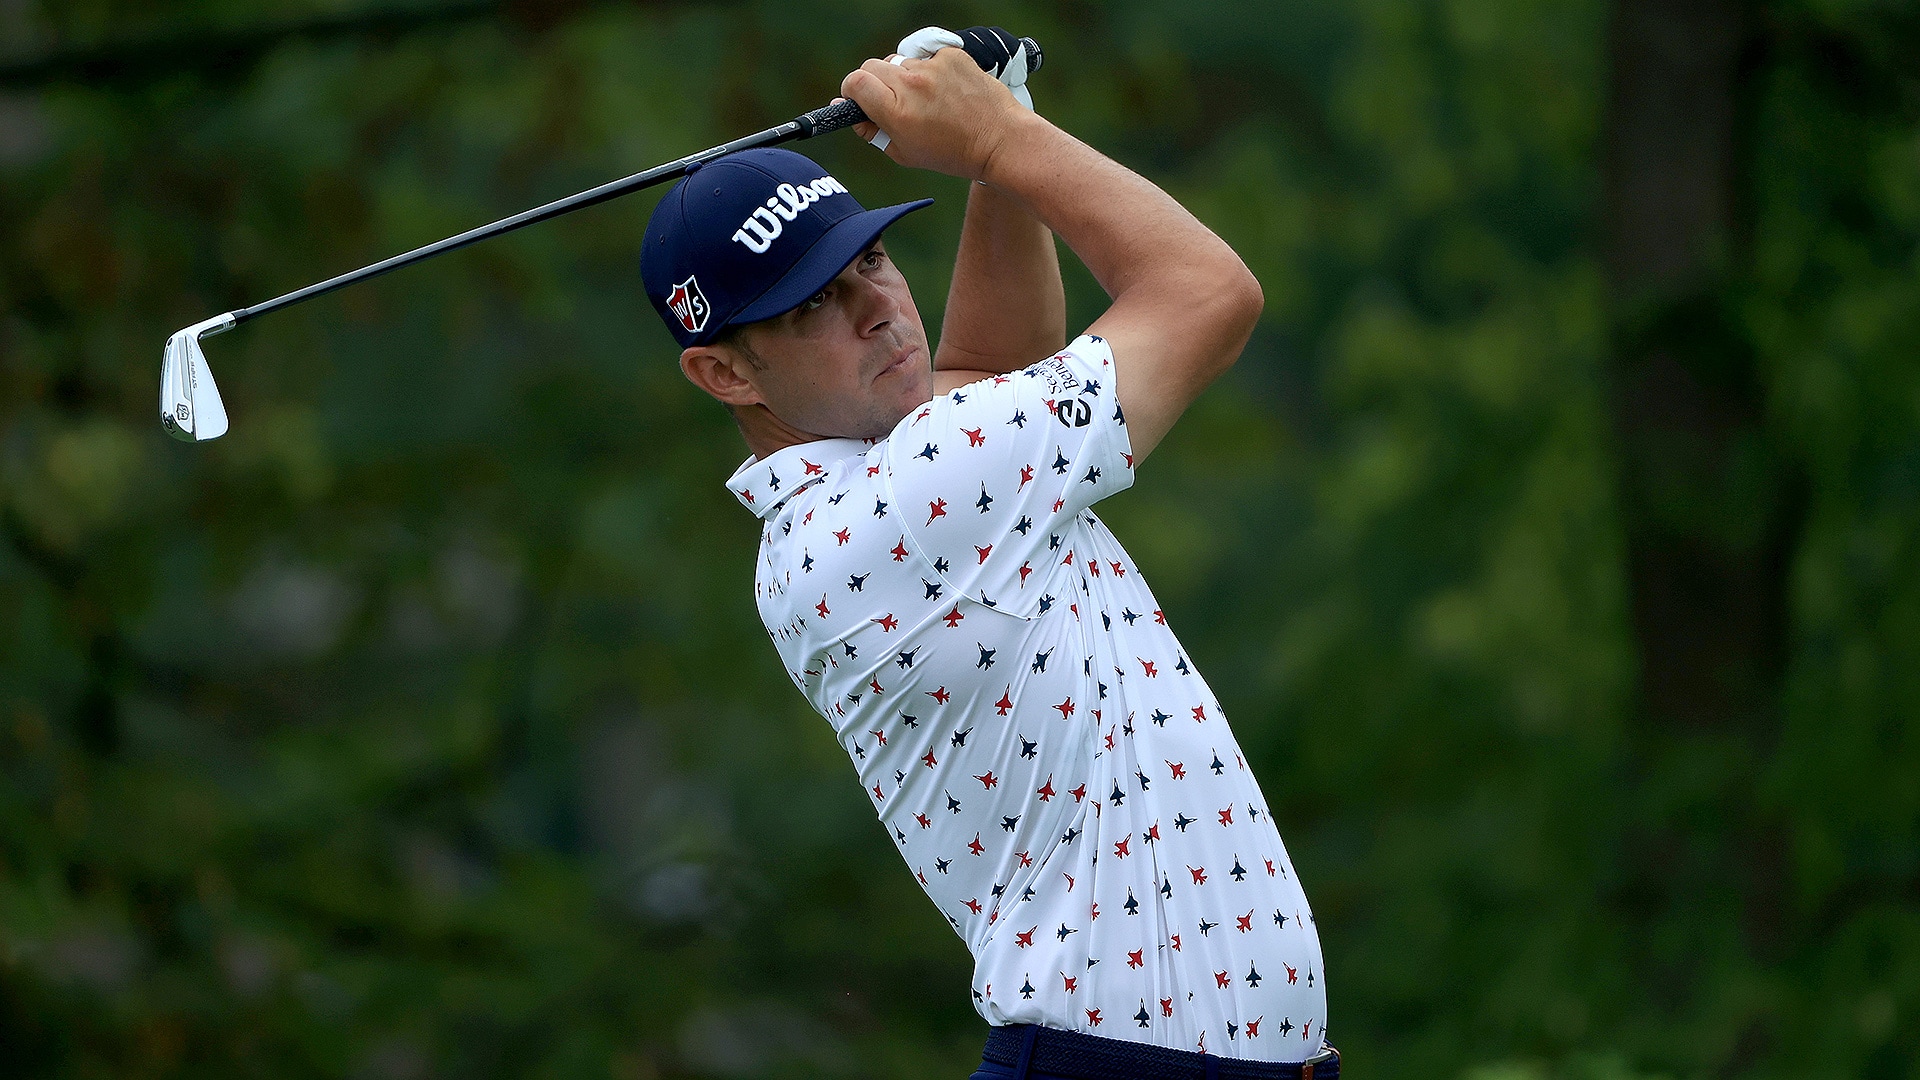 Thanks to new coach in the fold, Gary Woodland swings back into contention